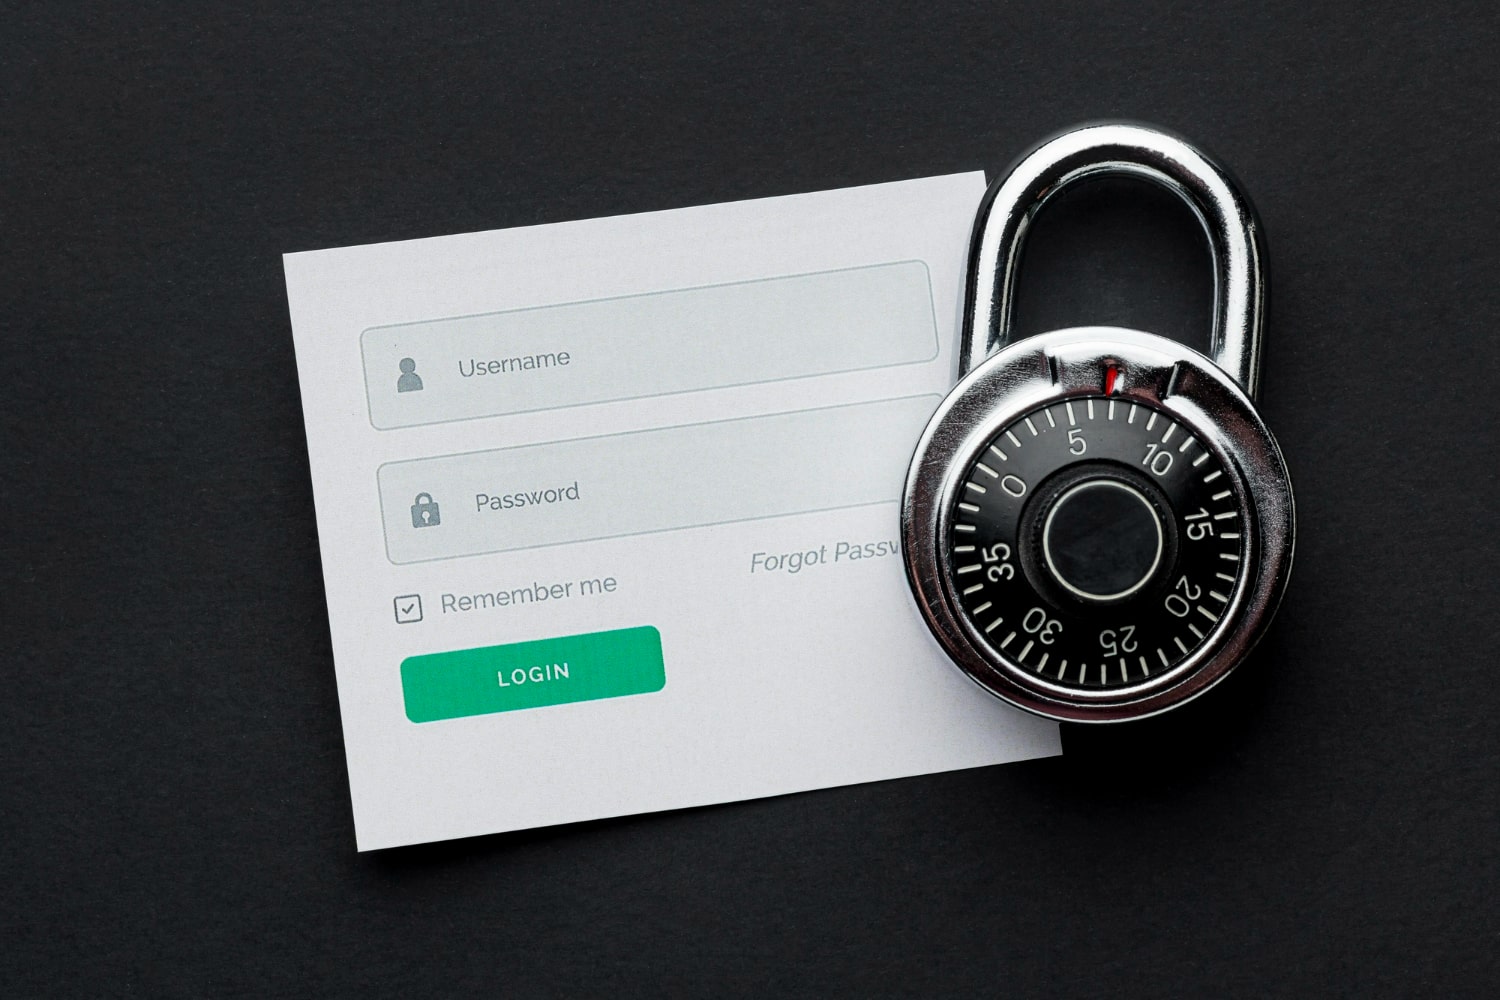 How to Prepare a Digital Will for your Passwords